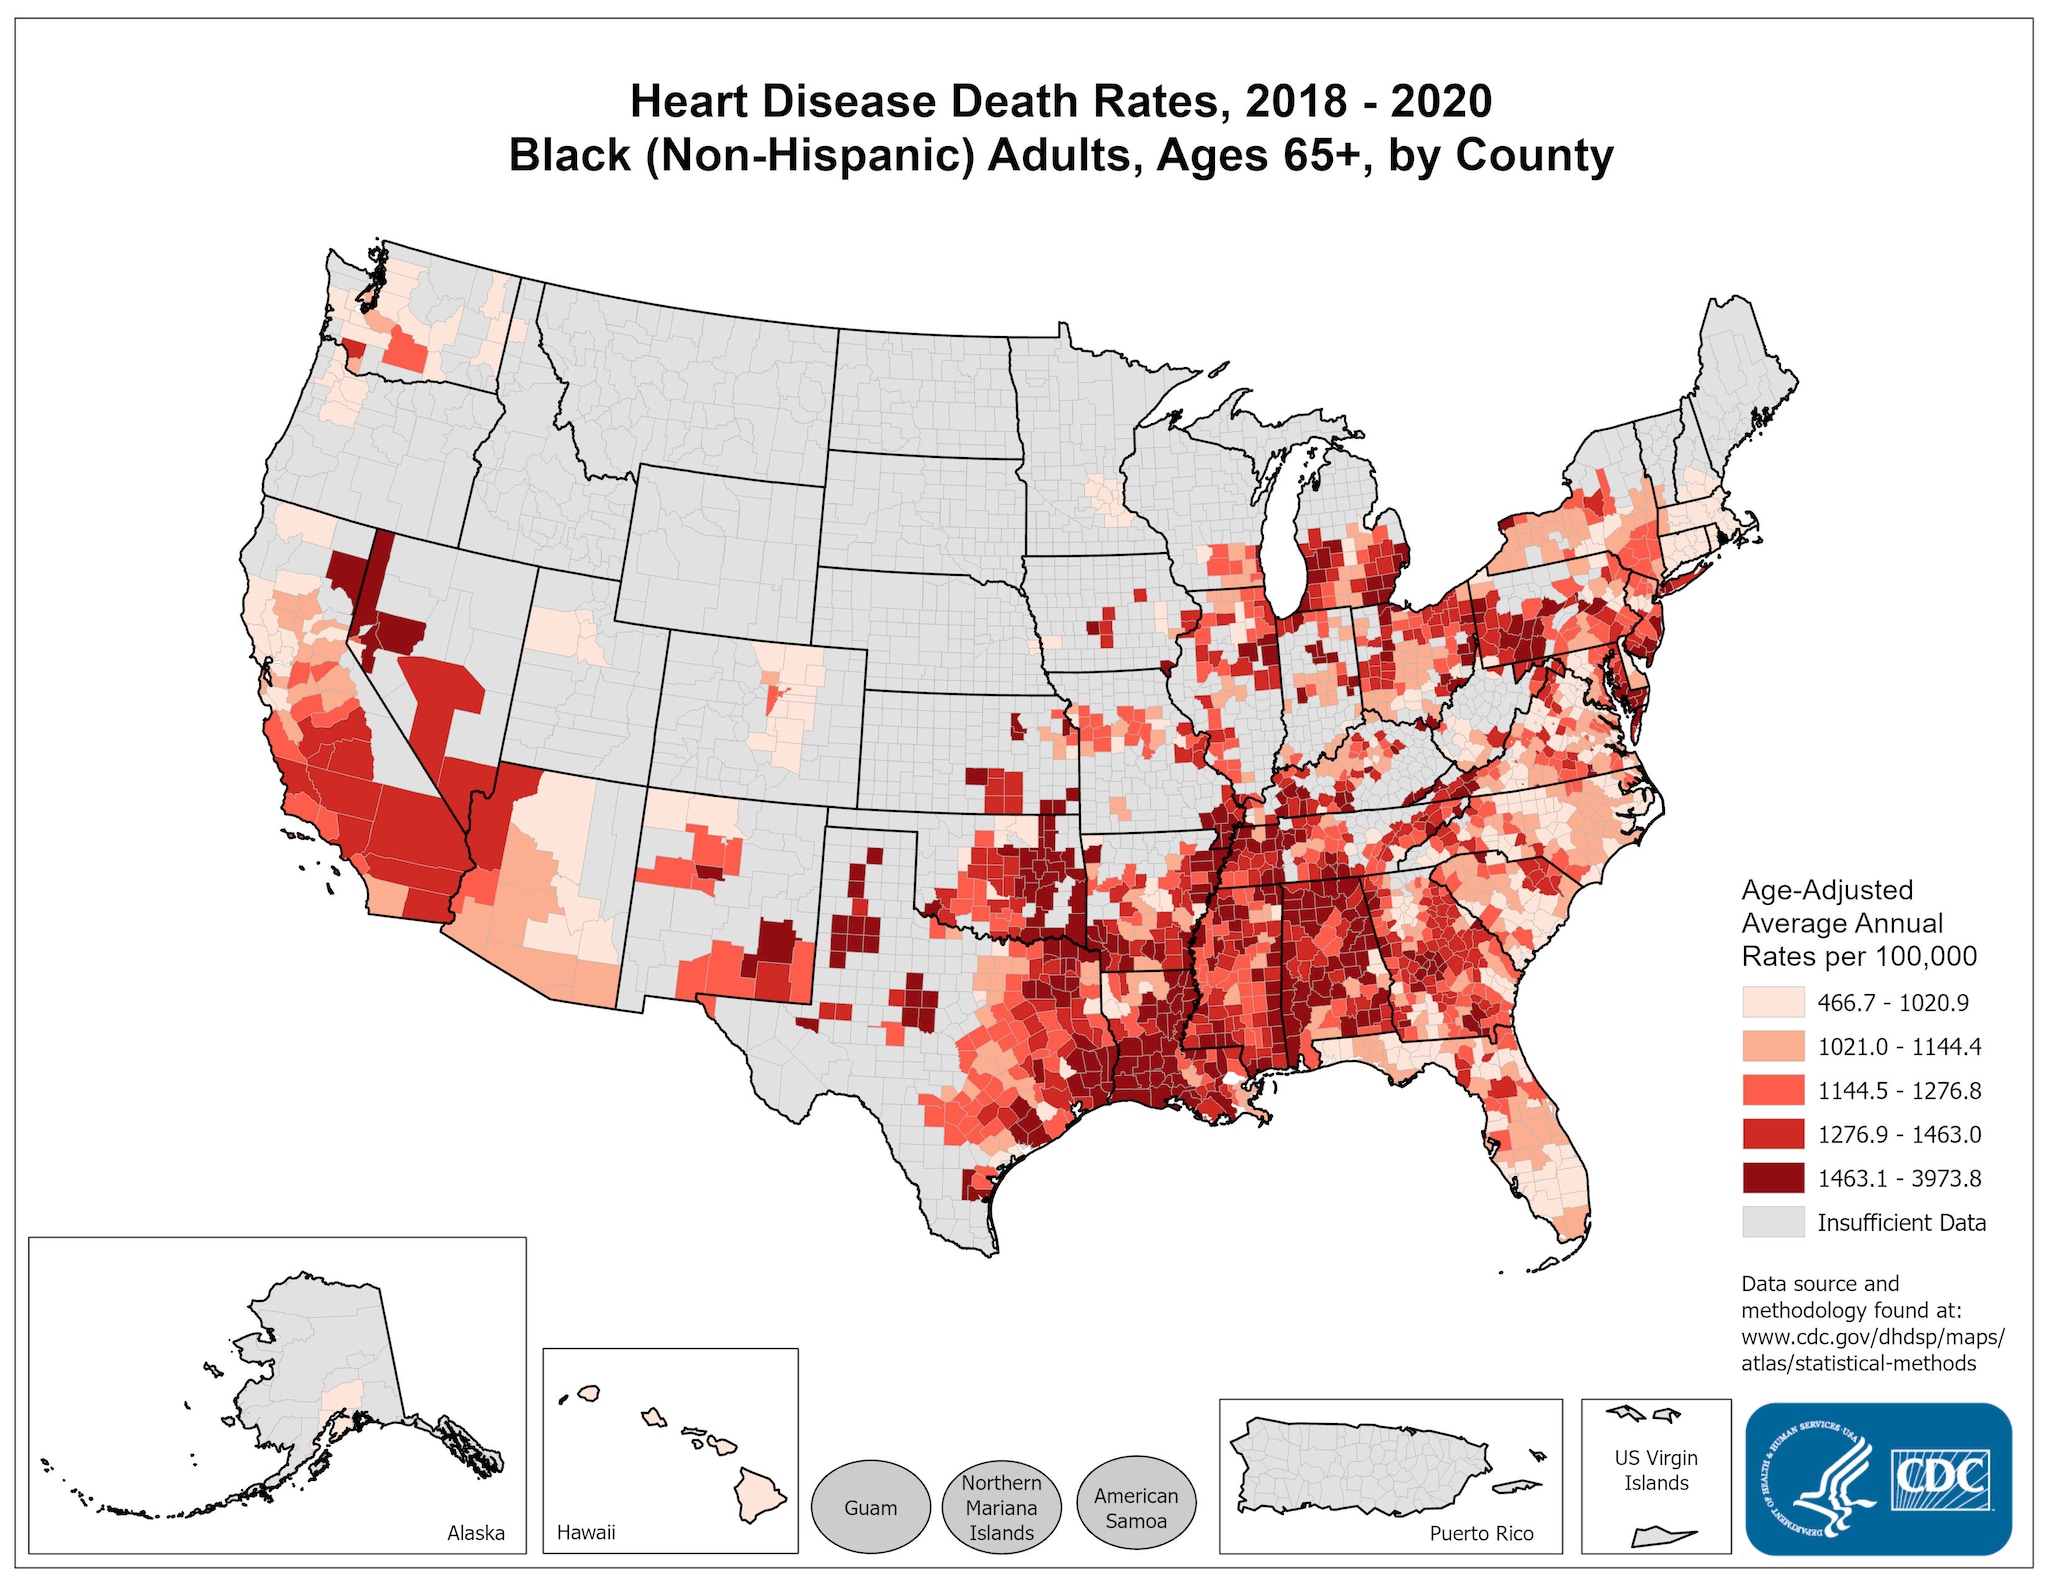 Heart Disease Death Rates for 2018 through 2020 for Blacks Aged 65 Years and Older by County